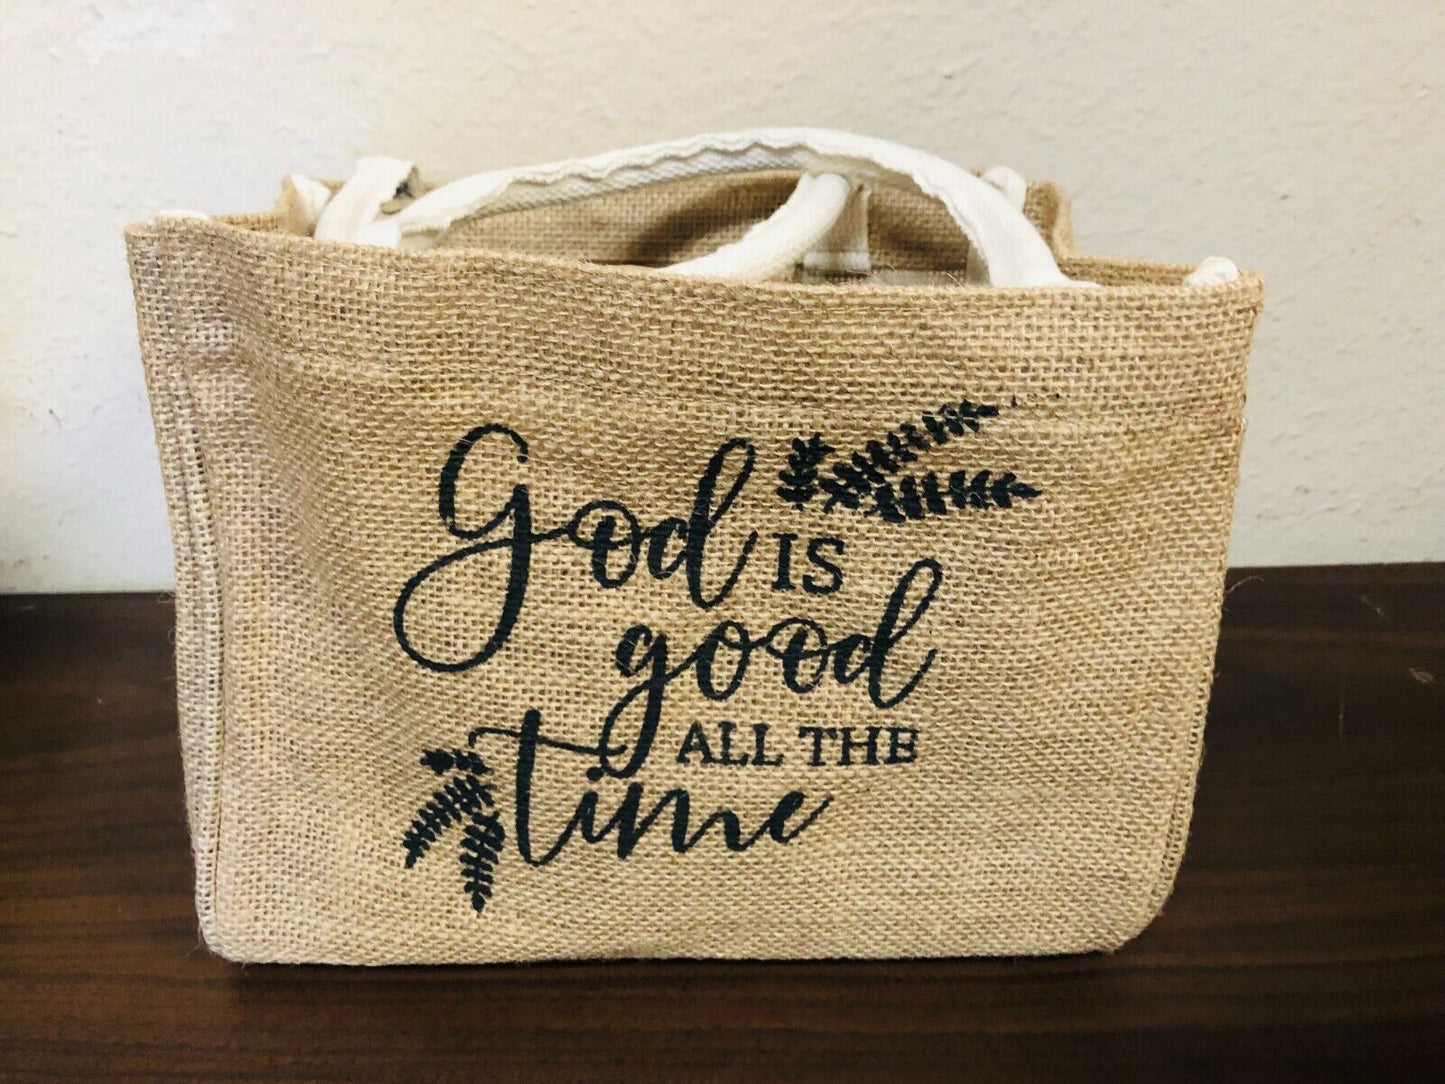 Jute small Tote, "God is good all the time", 10"x 7.5", New - Bob and Penny Lord